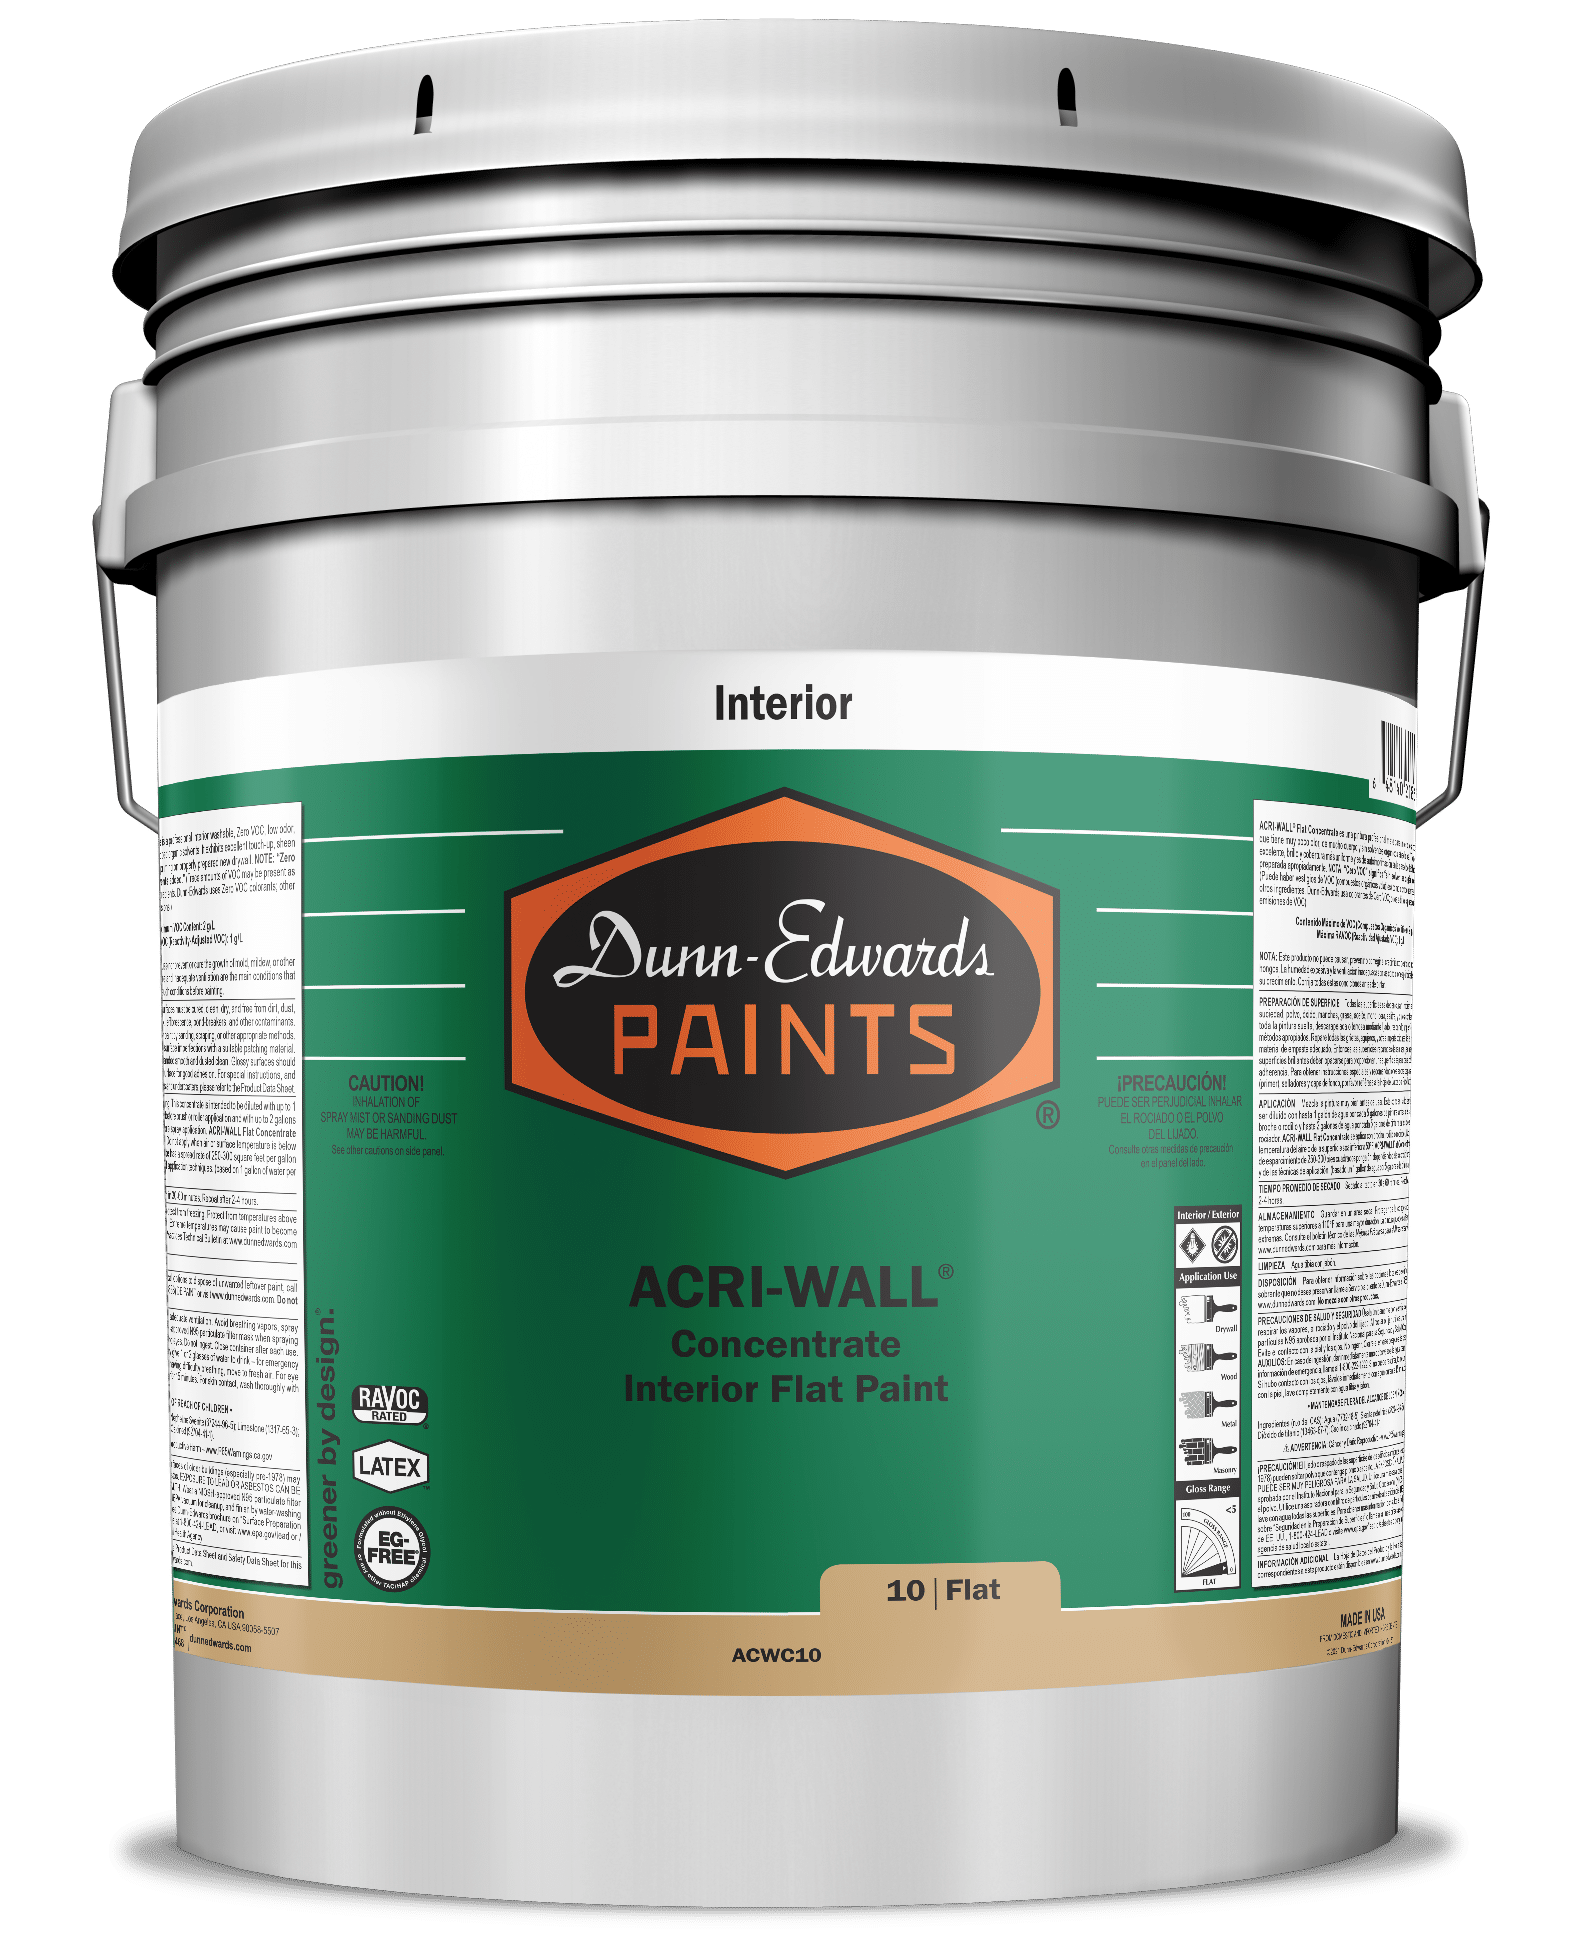 ACRI-WALL Concentrate Interior Flat Paint Can